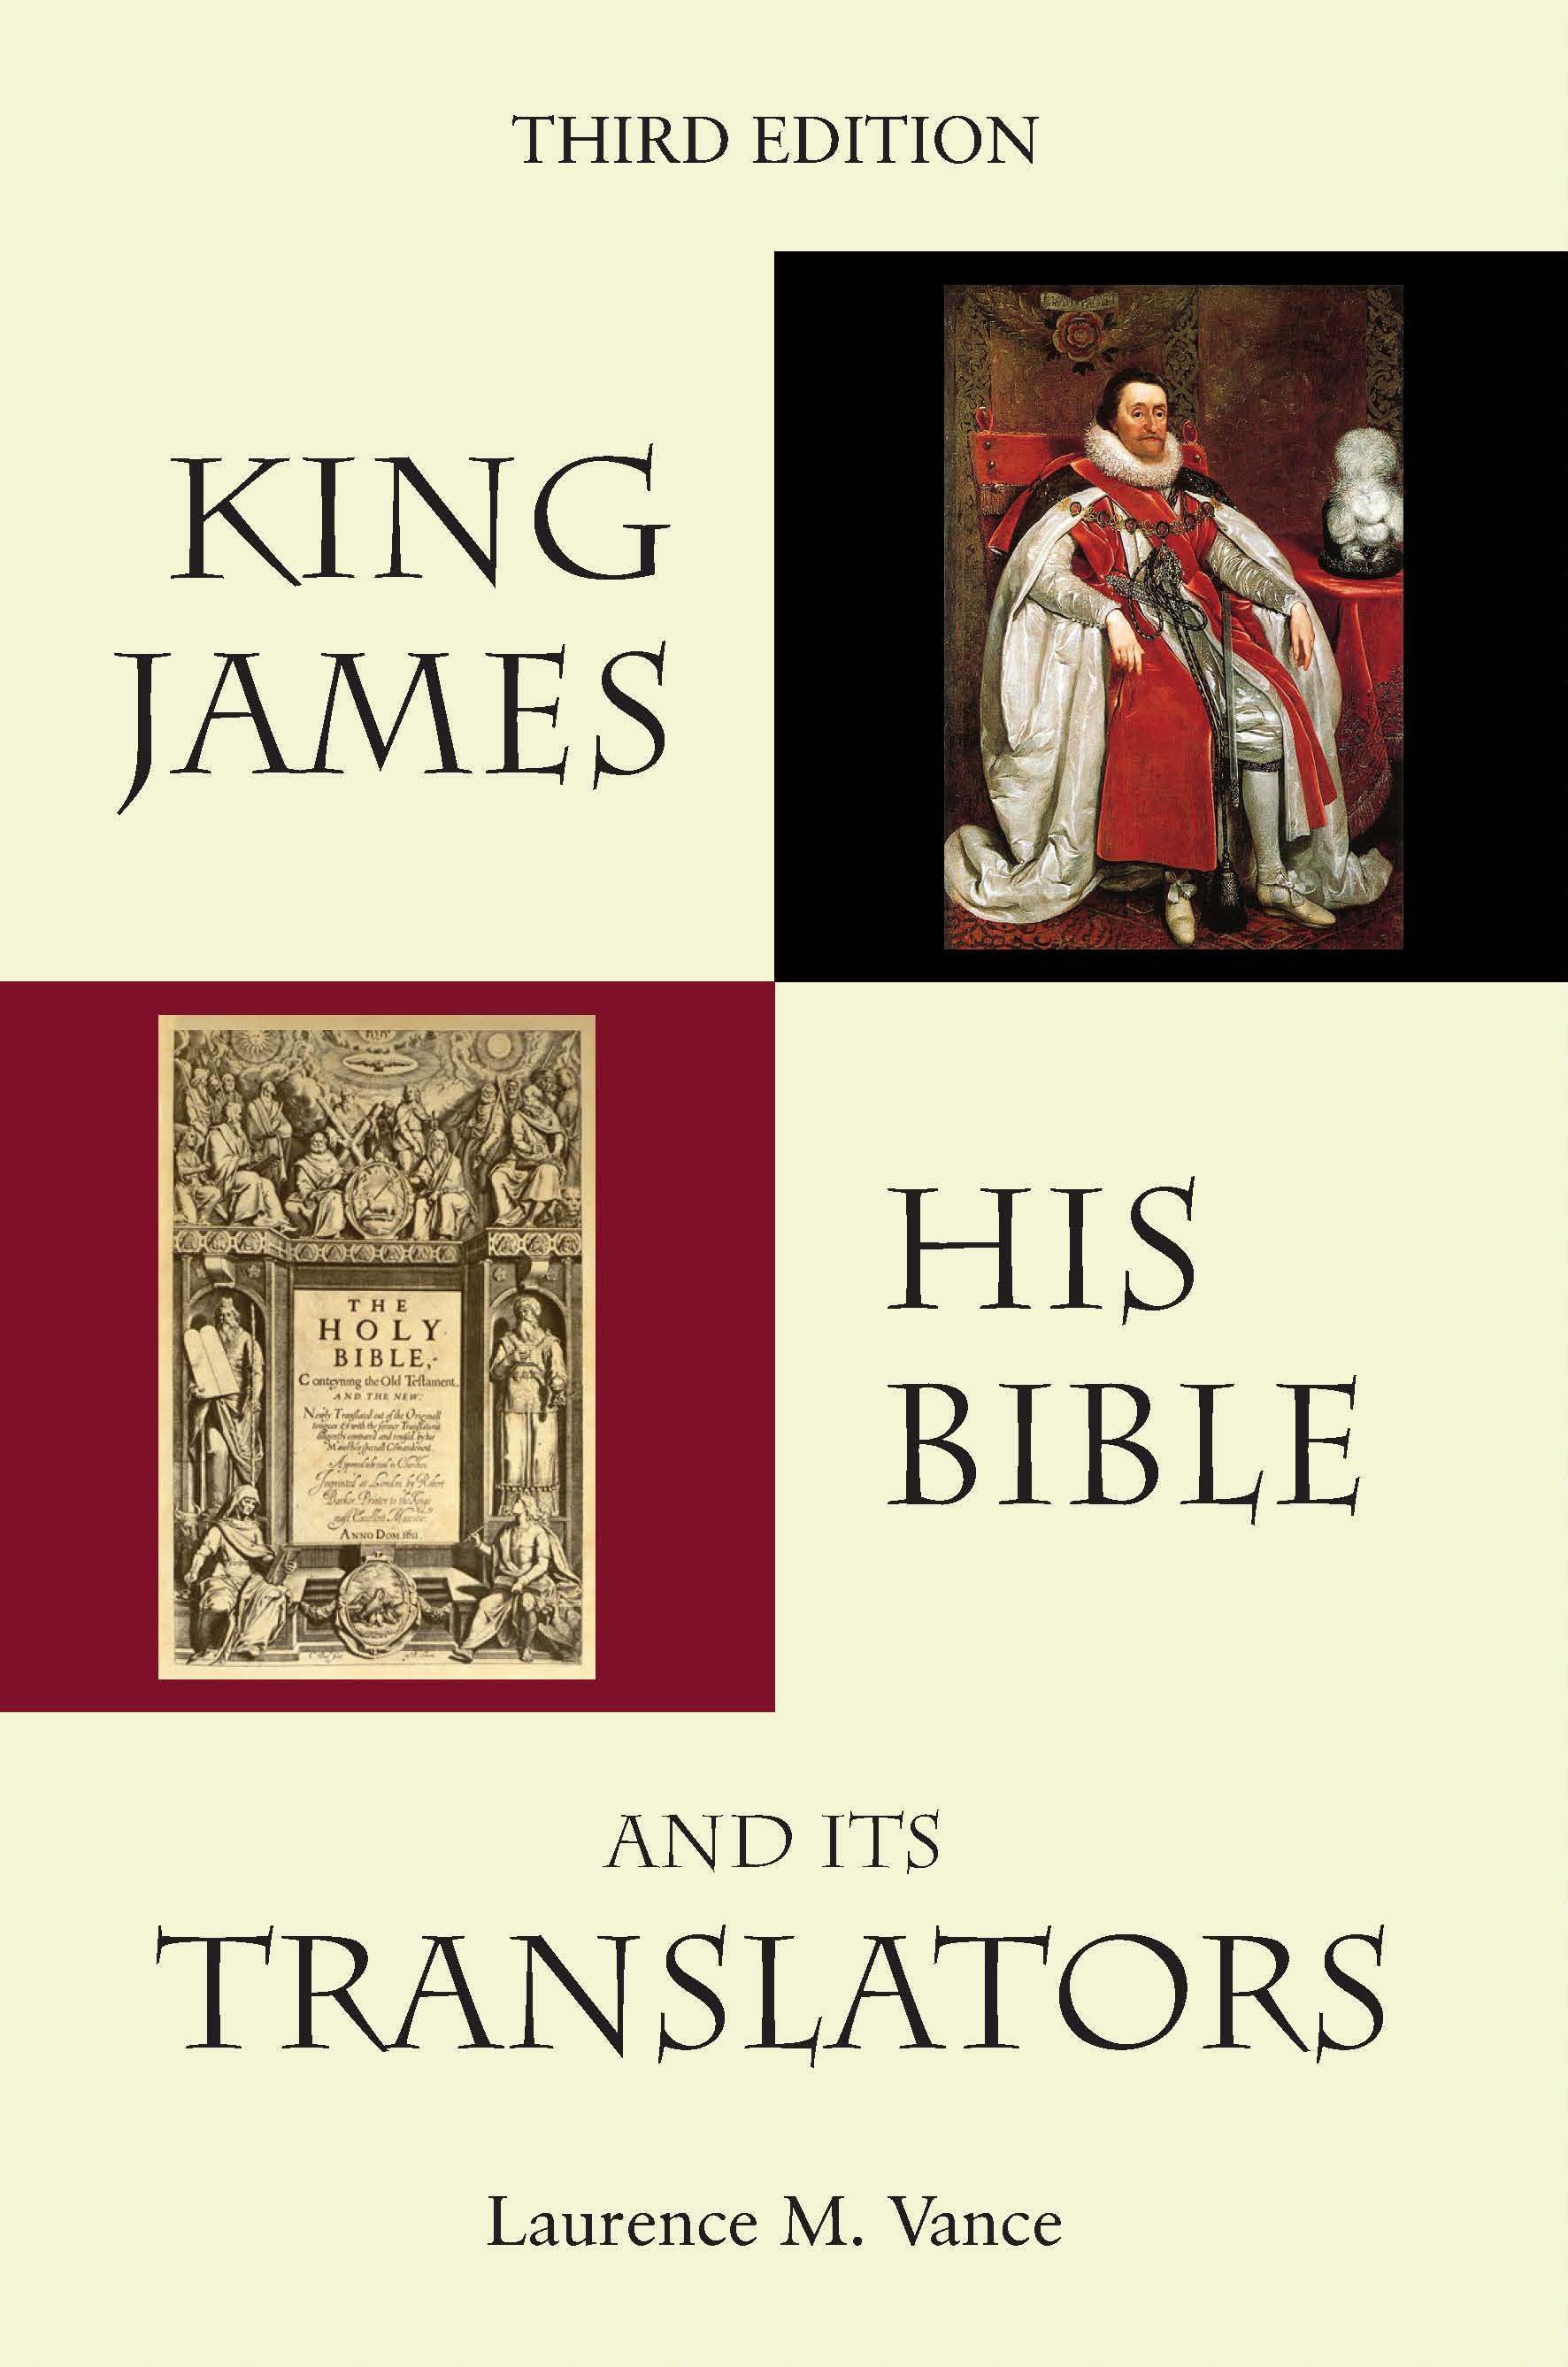 Who Wrote the King James Bible?